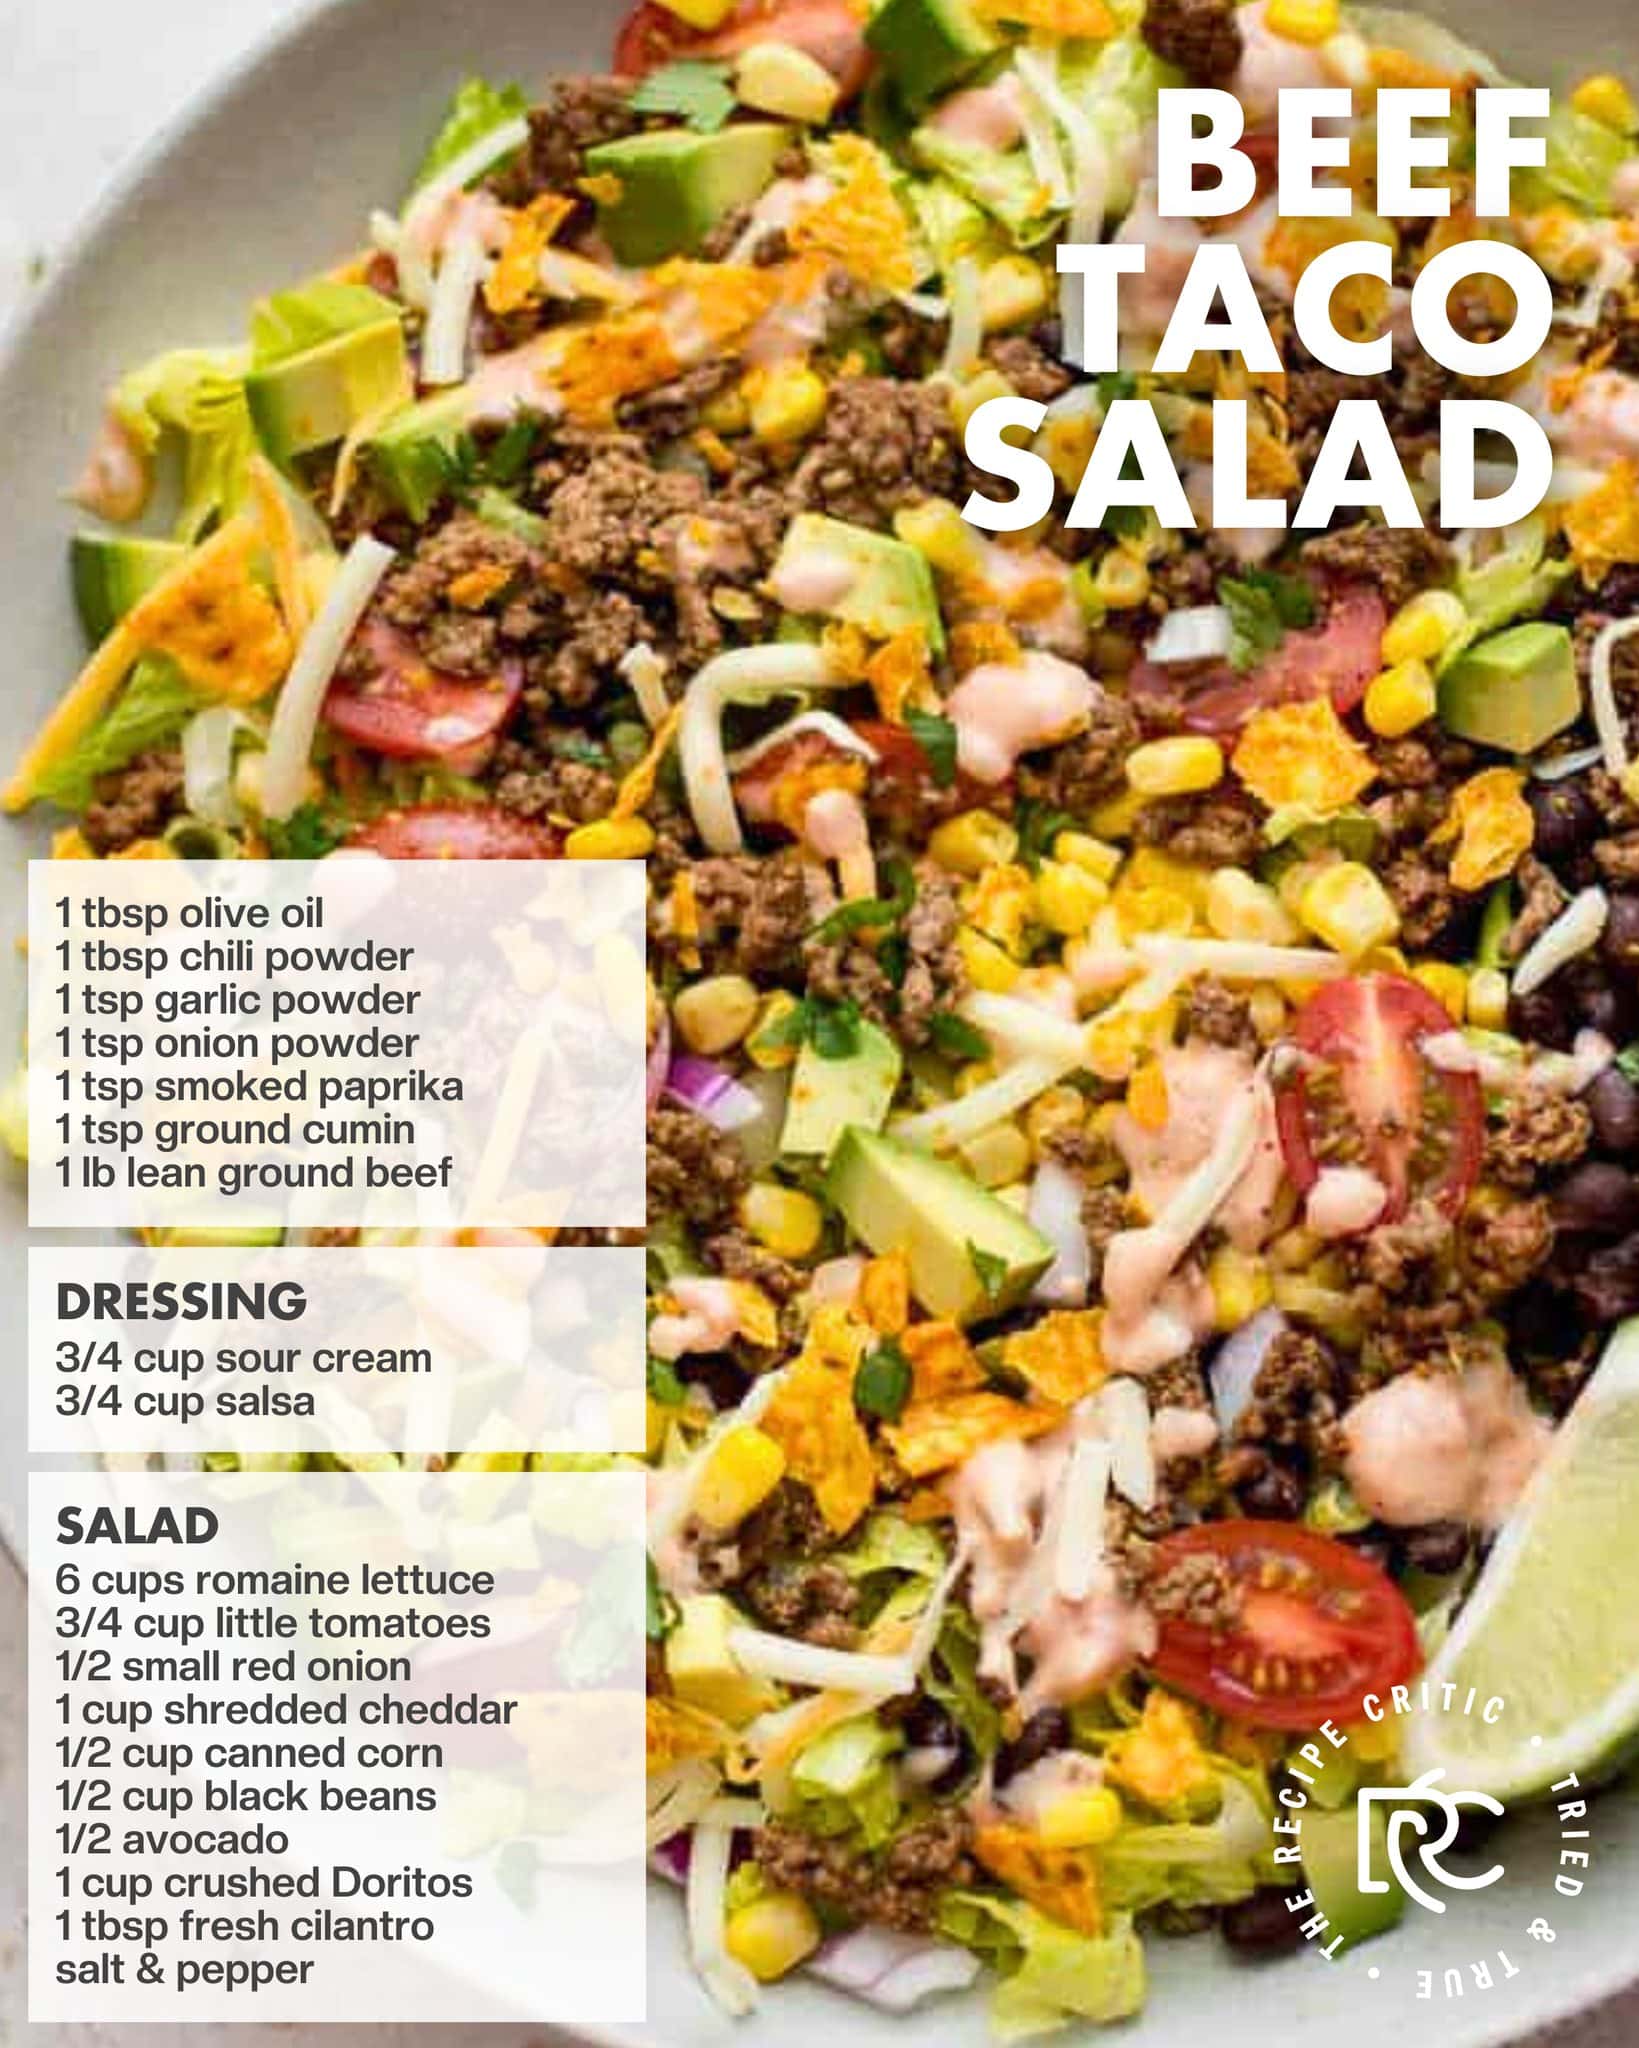 An image of an easy beef taco salad with a detailed list of ingredients and dressing recipe, perfect for busy families. The salad features lettuce, tomatoes, onions, cheese, and seasoned beef, garnished